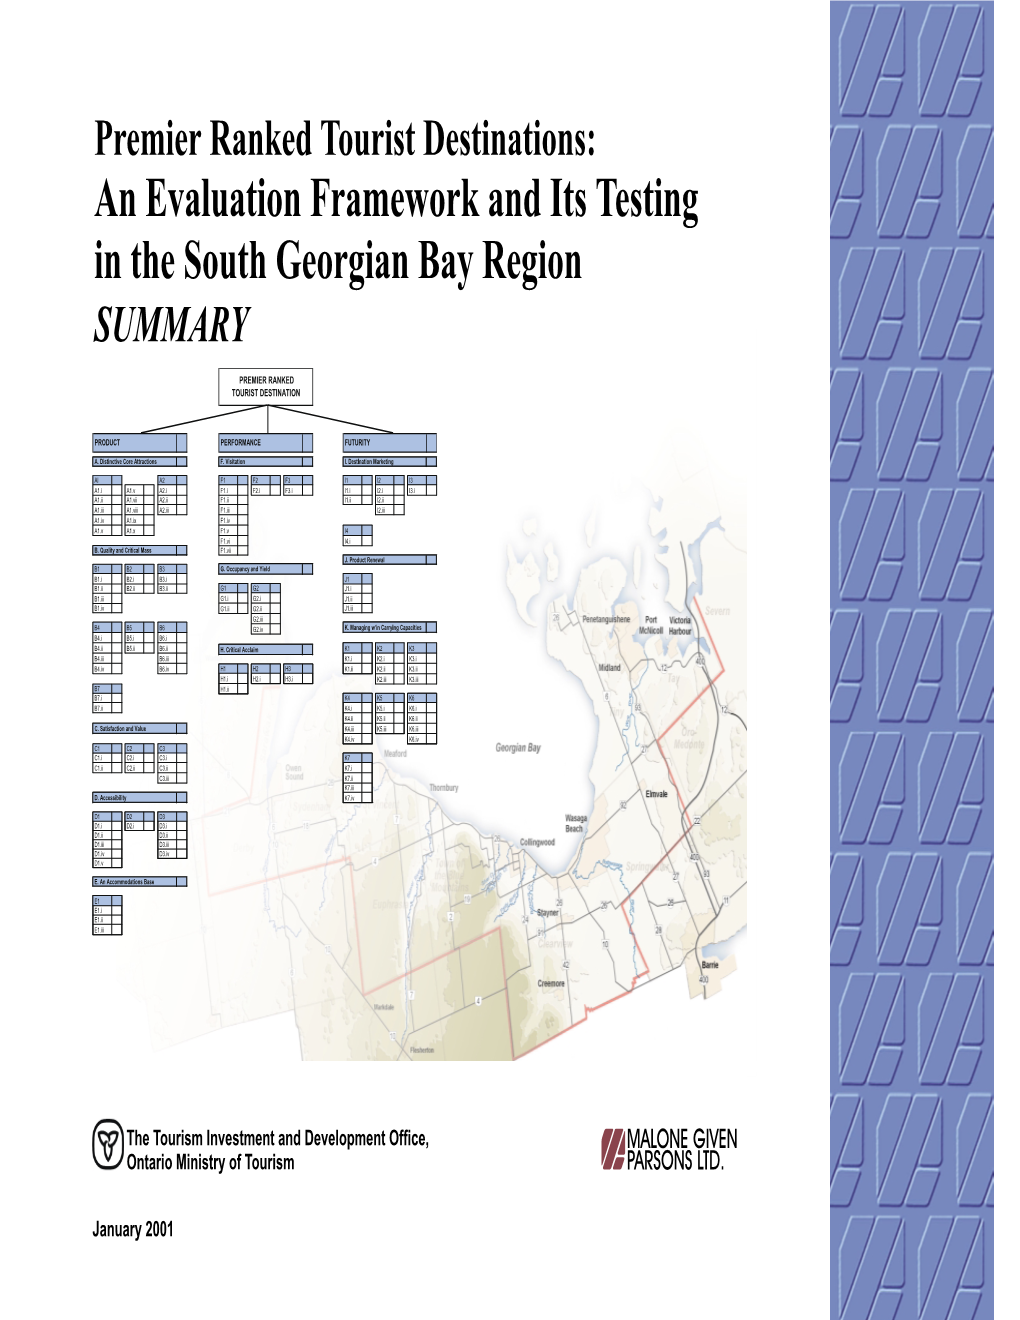 An Evaluation Framework and Its Testing in the South Georgian Bay Region SUMMARY